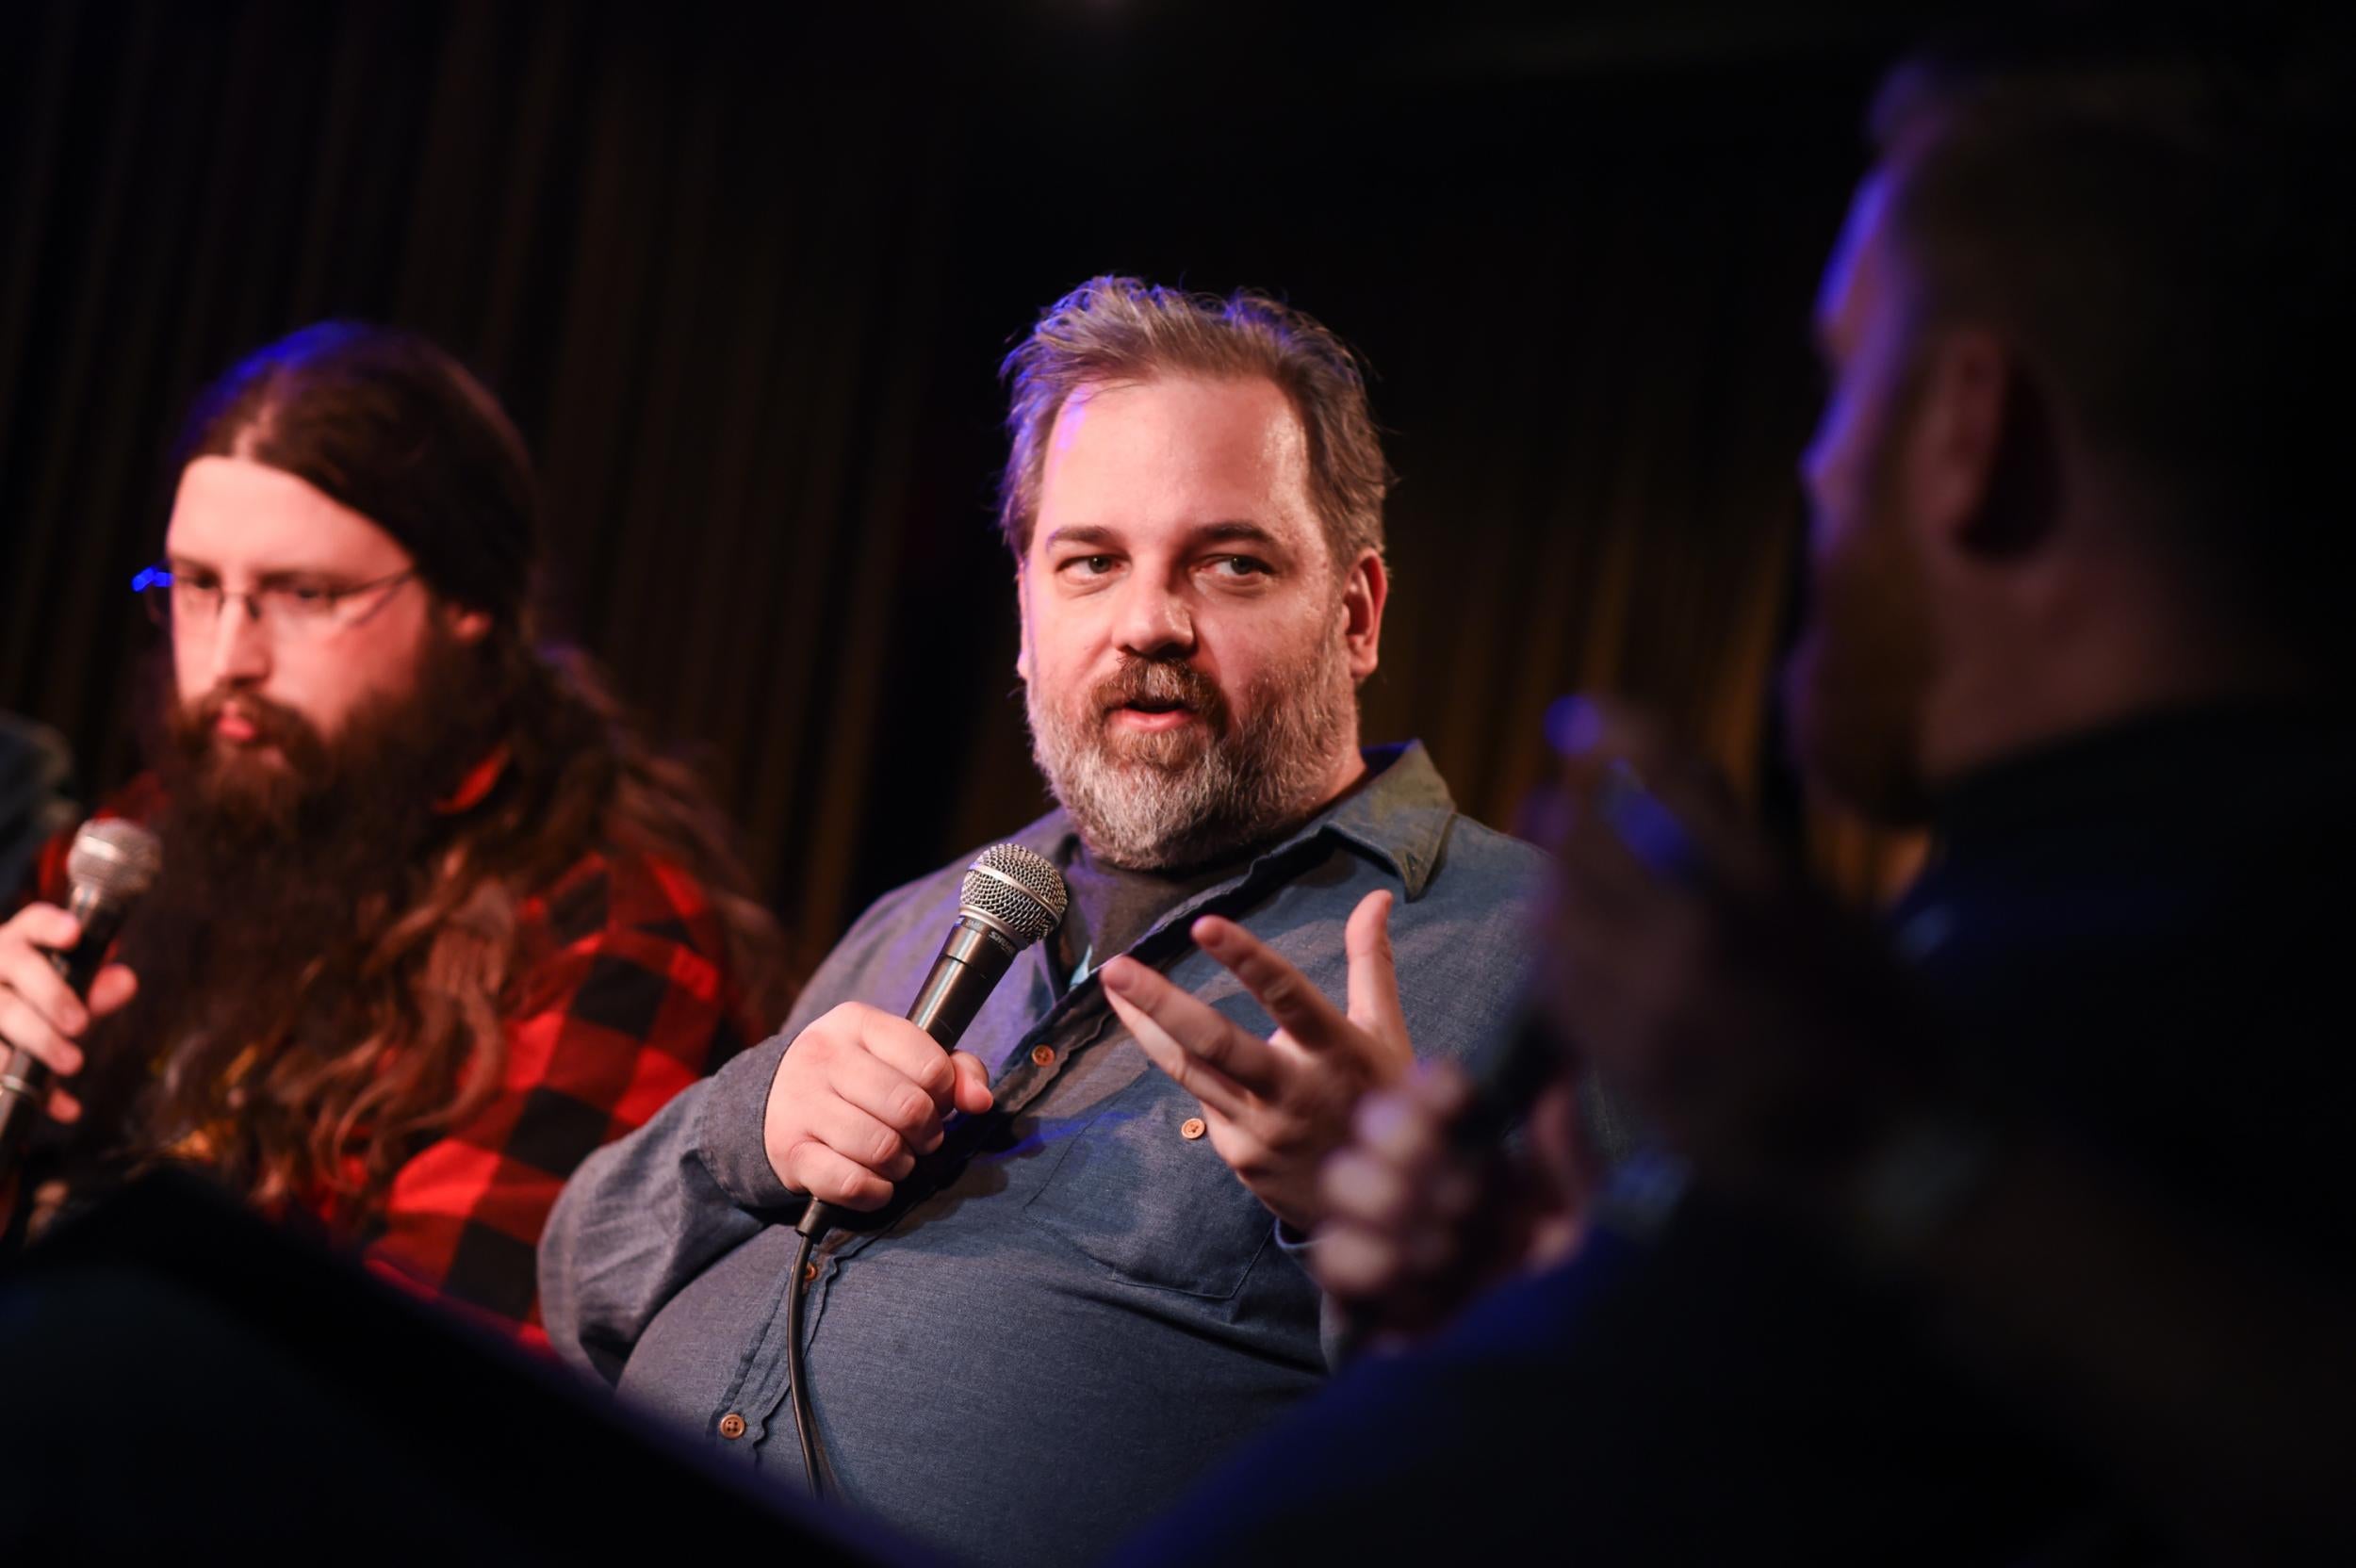 Dan Harmon has a history of workplace misconduct